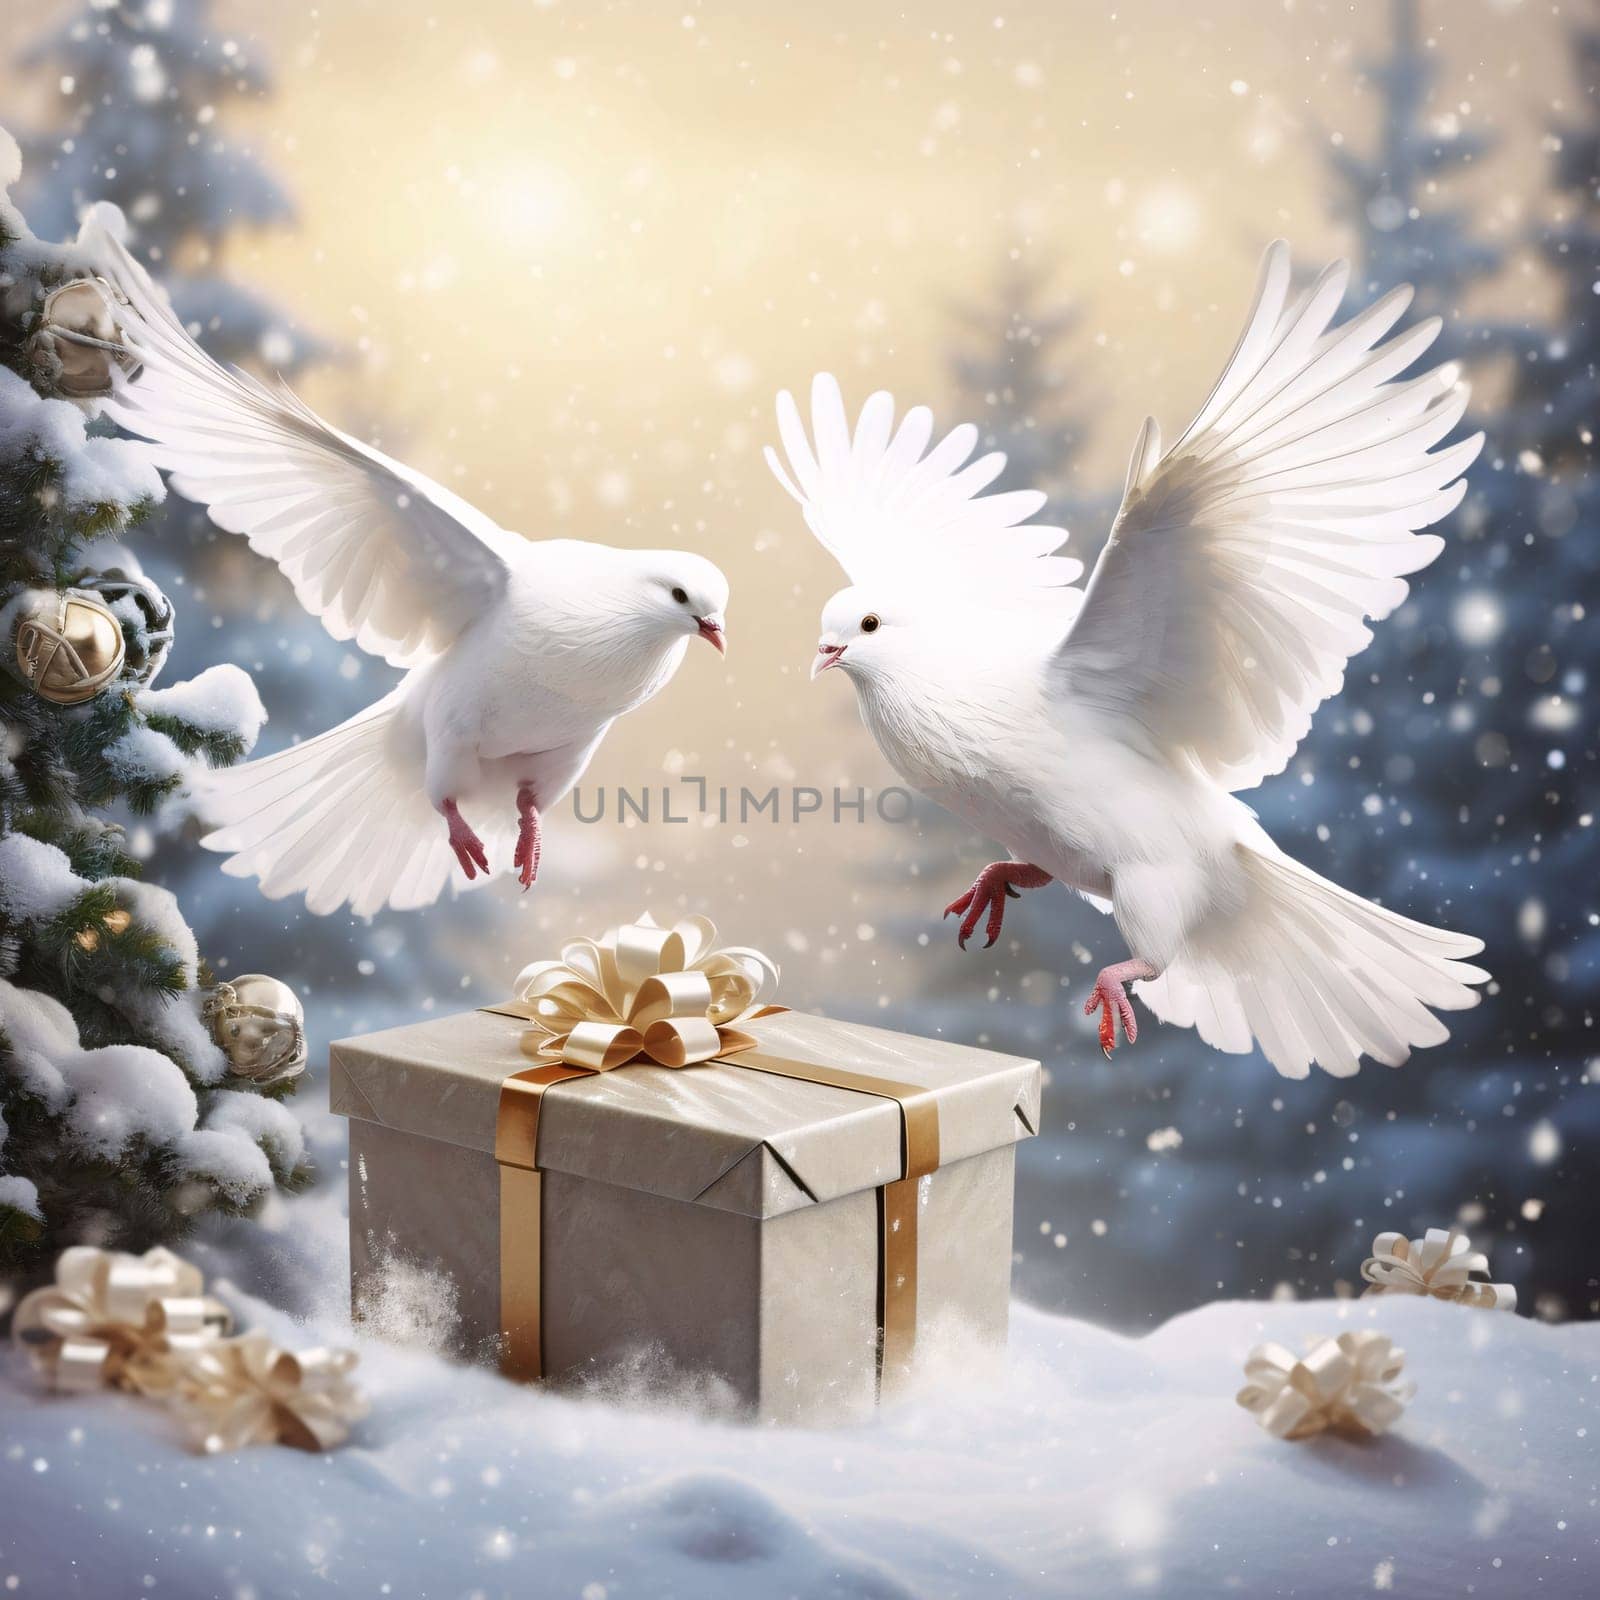 Two doves in flight over a gift around a Christmas tree falling snow.Valentine's Day banner with space for your own content. Heart as a symbol of affection and love.